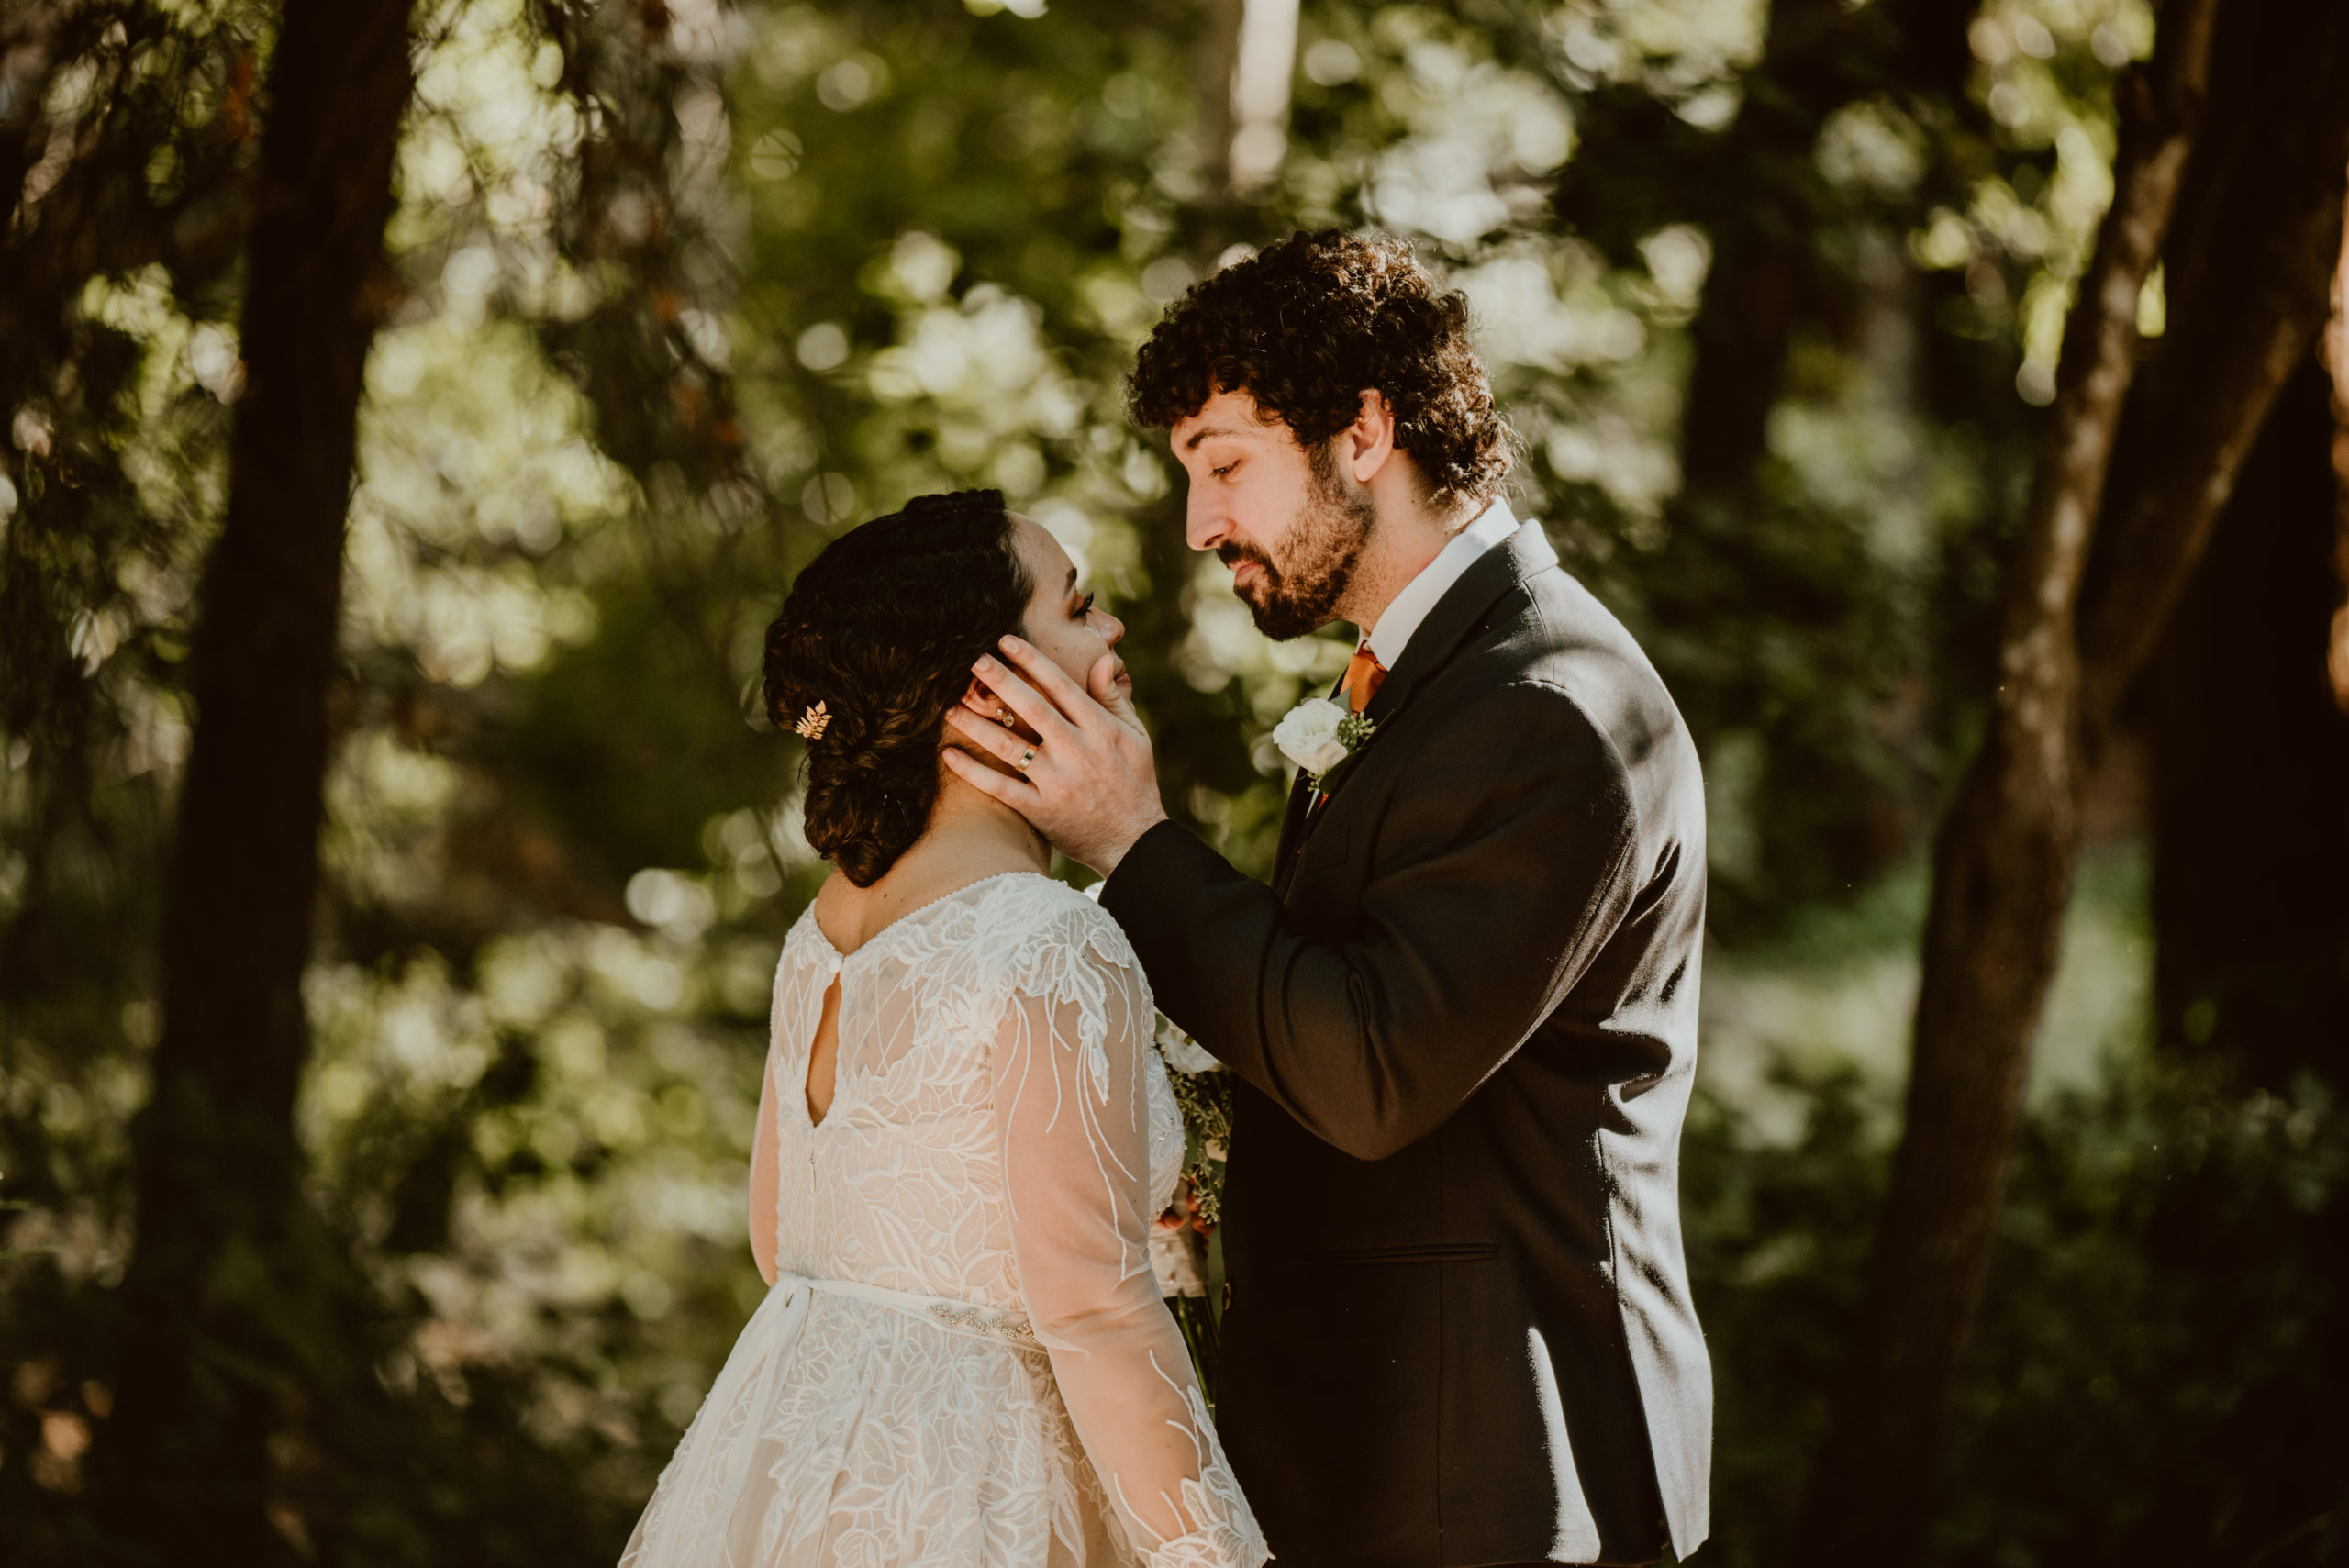 A groom holds his bride's face as he leans down to kiss her in front of a sunny grove of trees. This page details what an elopement is and why you should have one, so be sure to give it a read if you're curious about them!